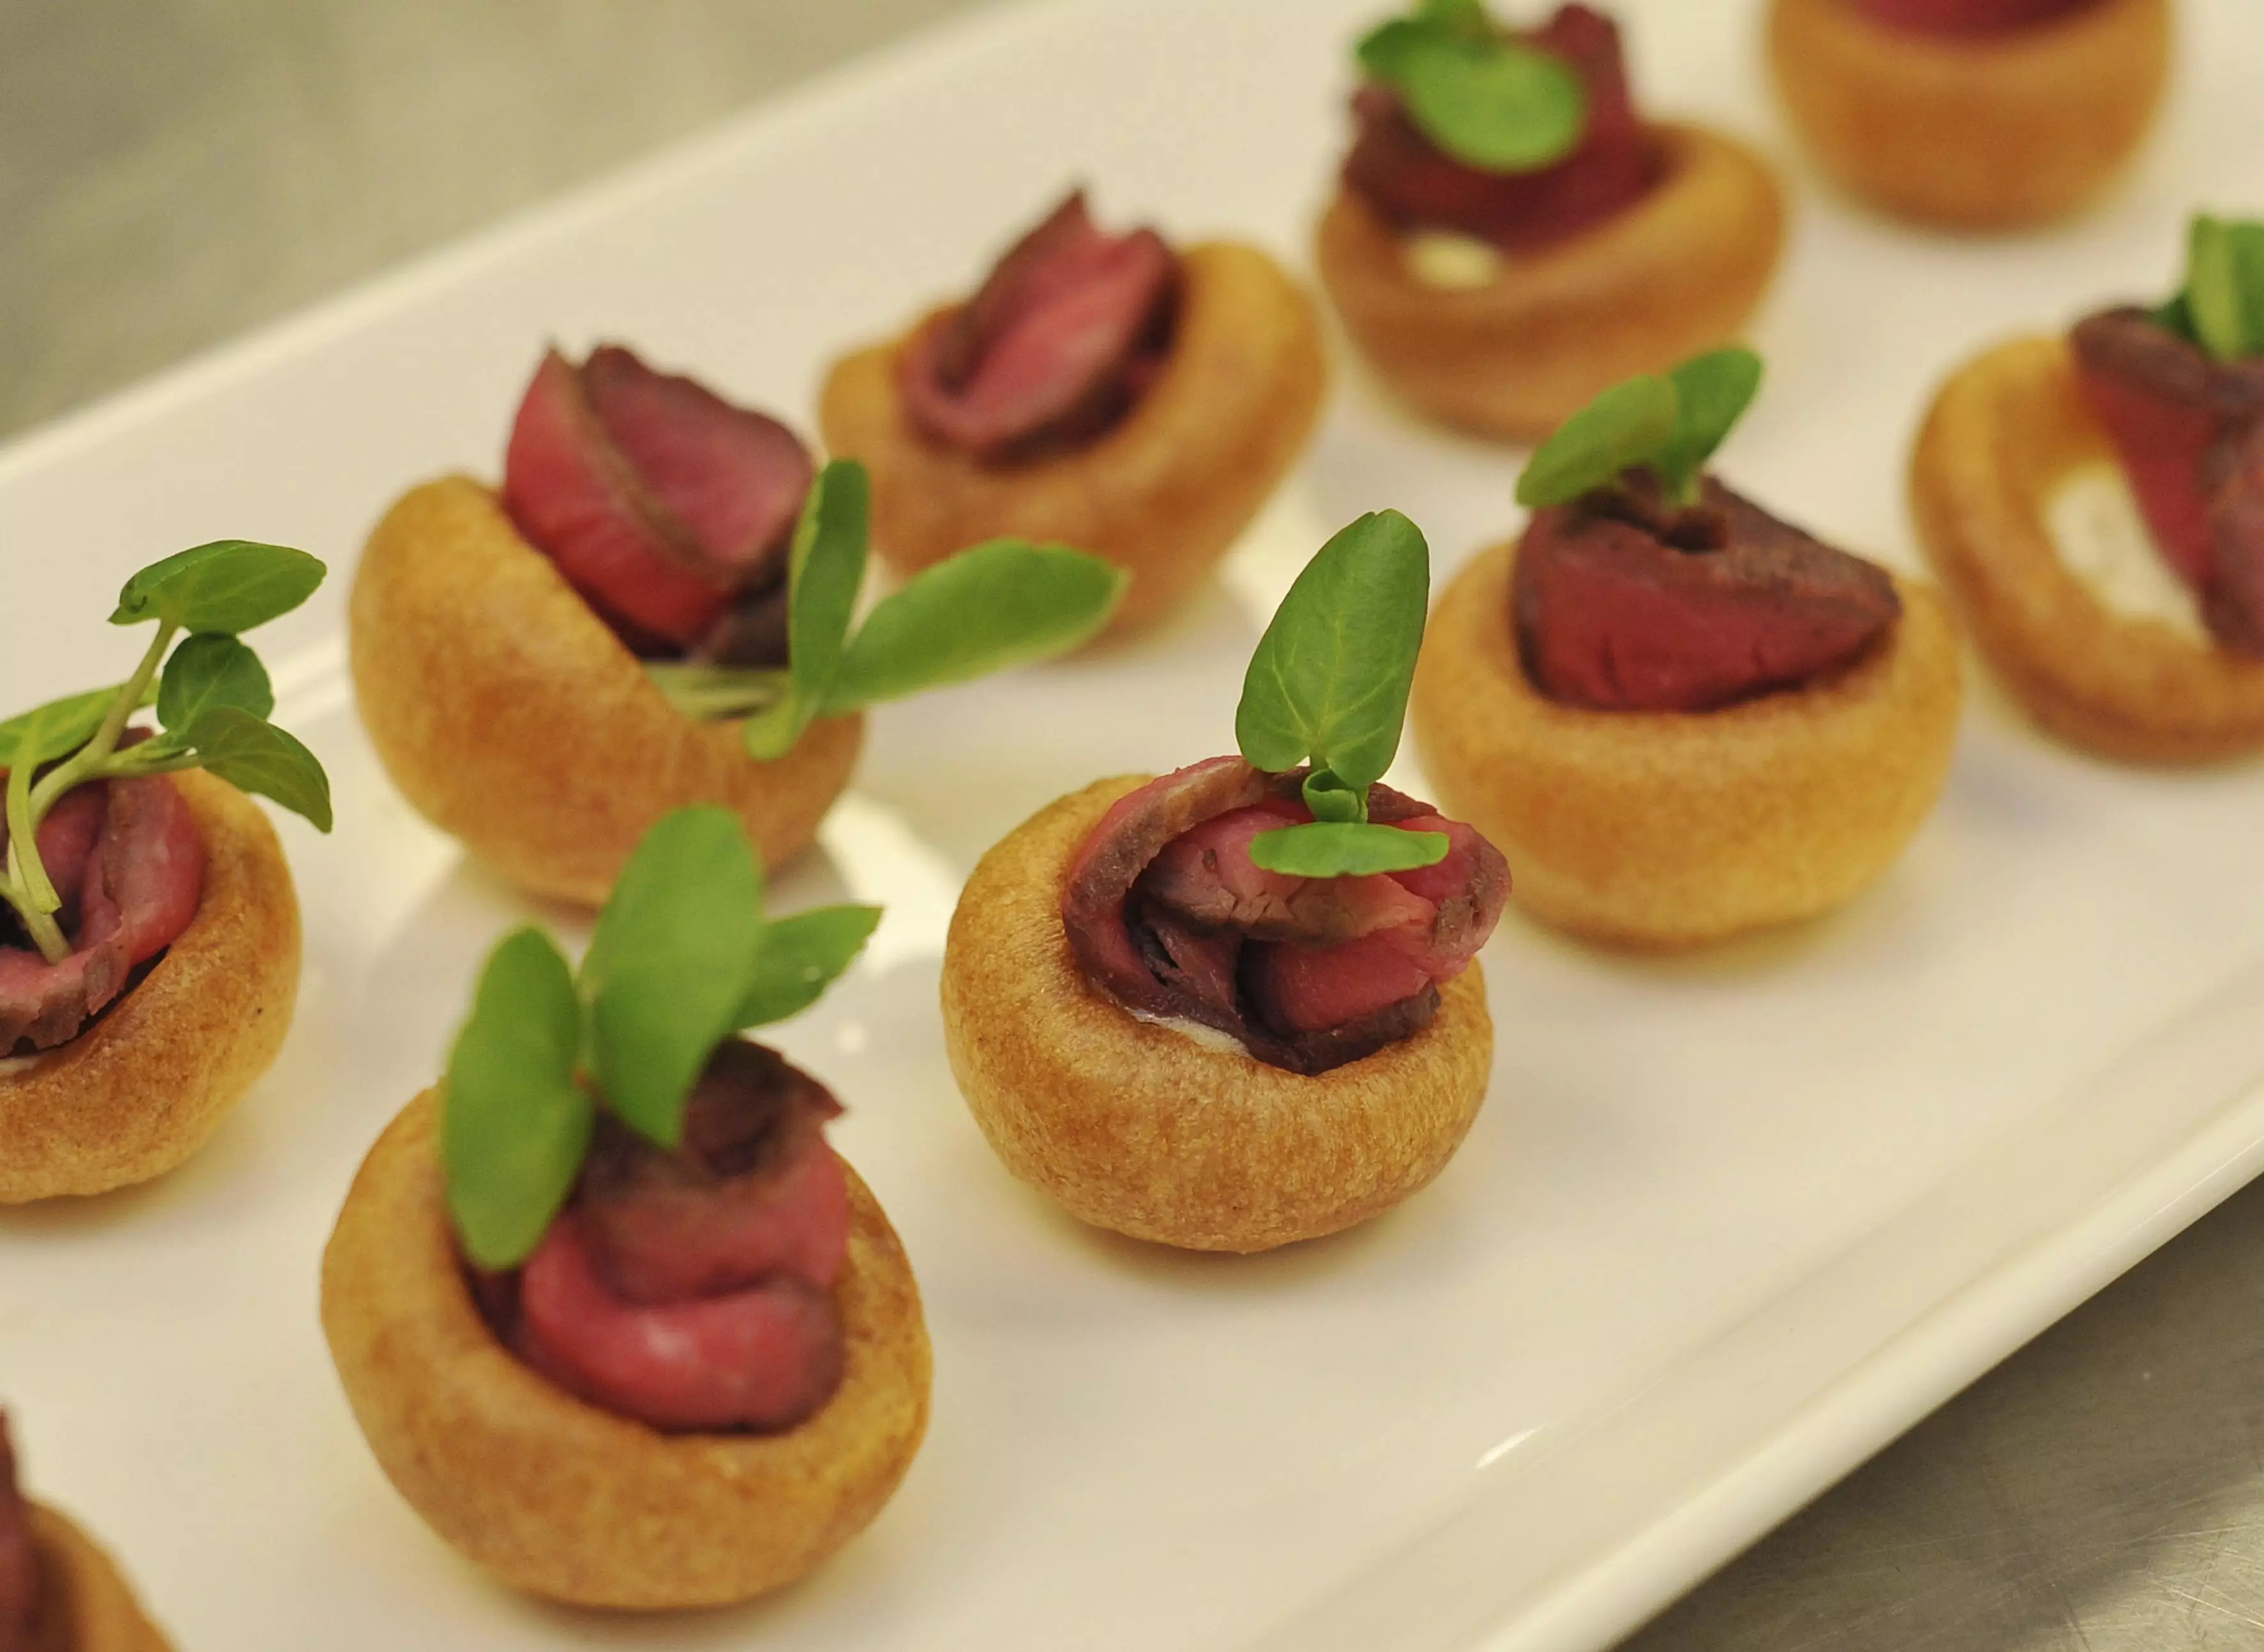 Guests will be able to sample an array of different kinds of Yorkies (